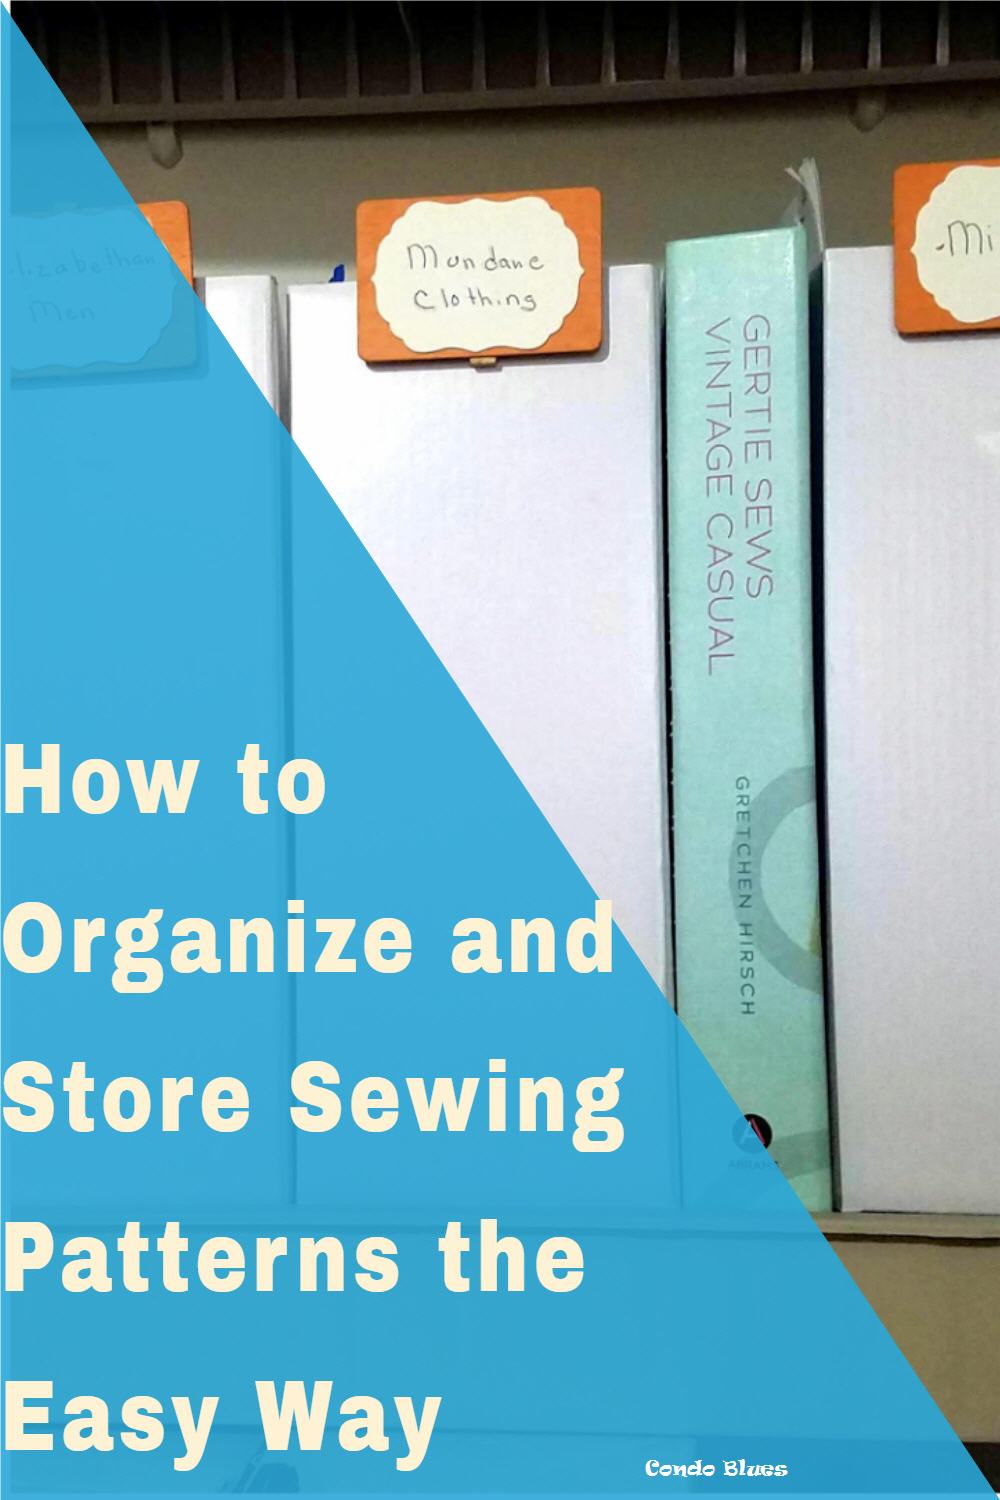 Condo Blues: The Best Ever Quick and Easy Sewing Pattern Storage and  Organization Idea